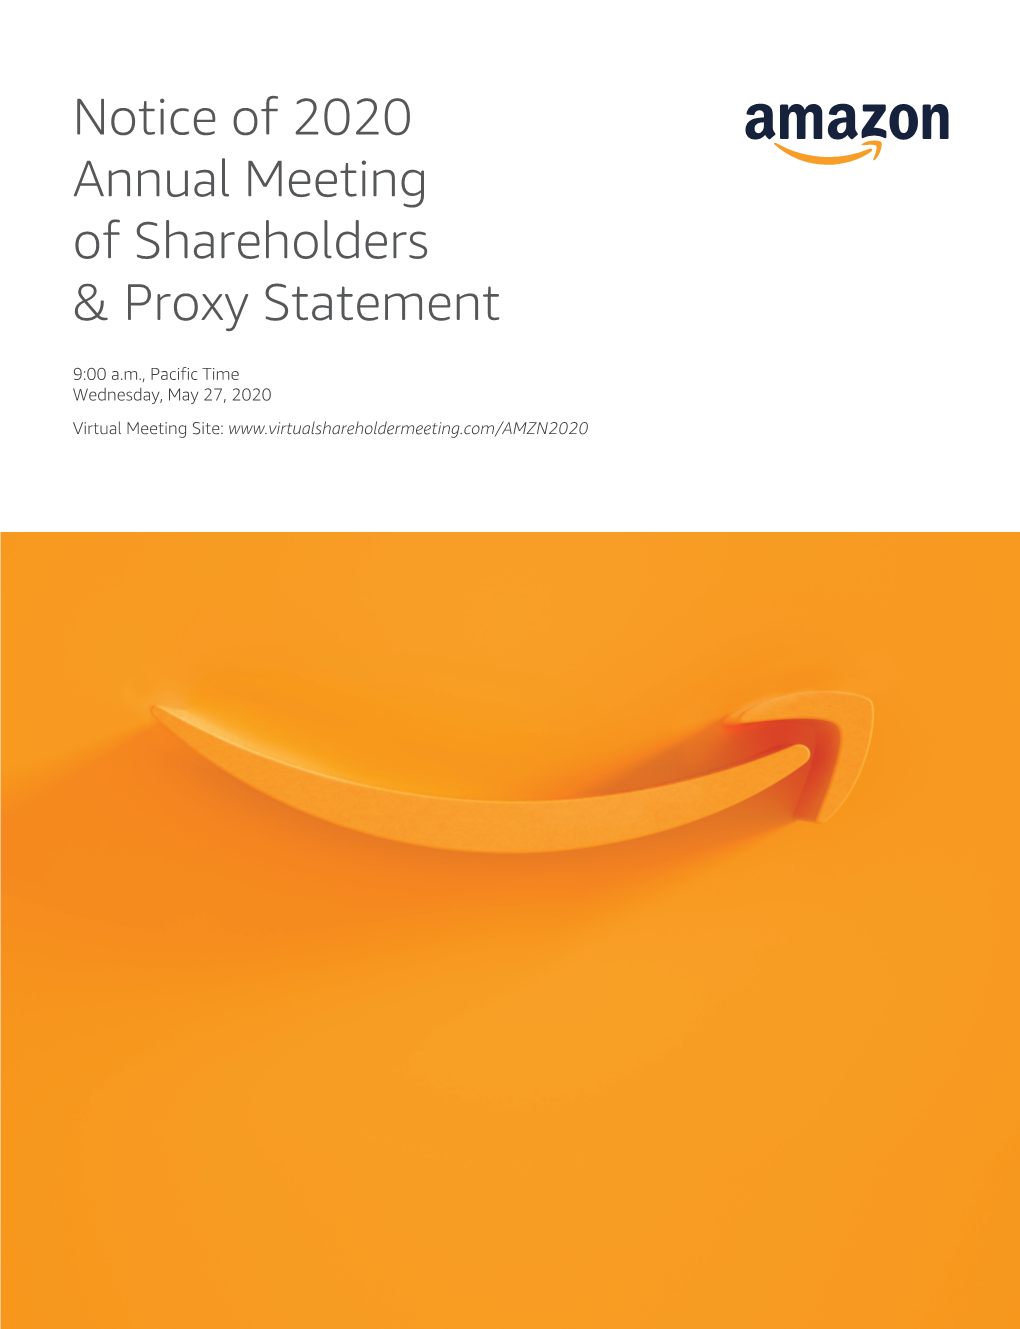 Notice of 2020 Annual Meeting of Shareholders & Proxy Statement